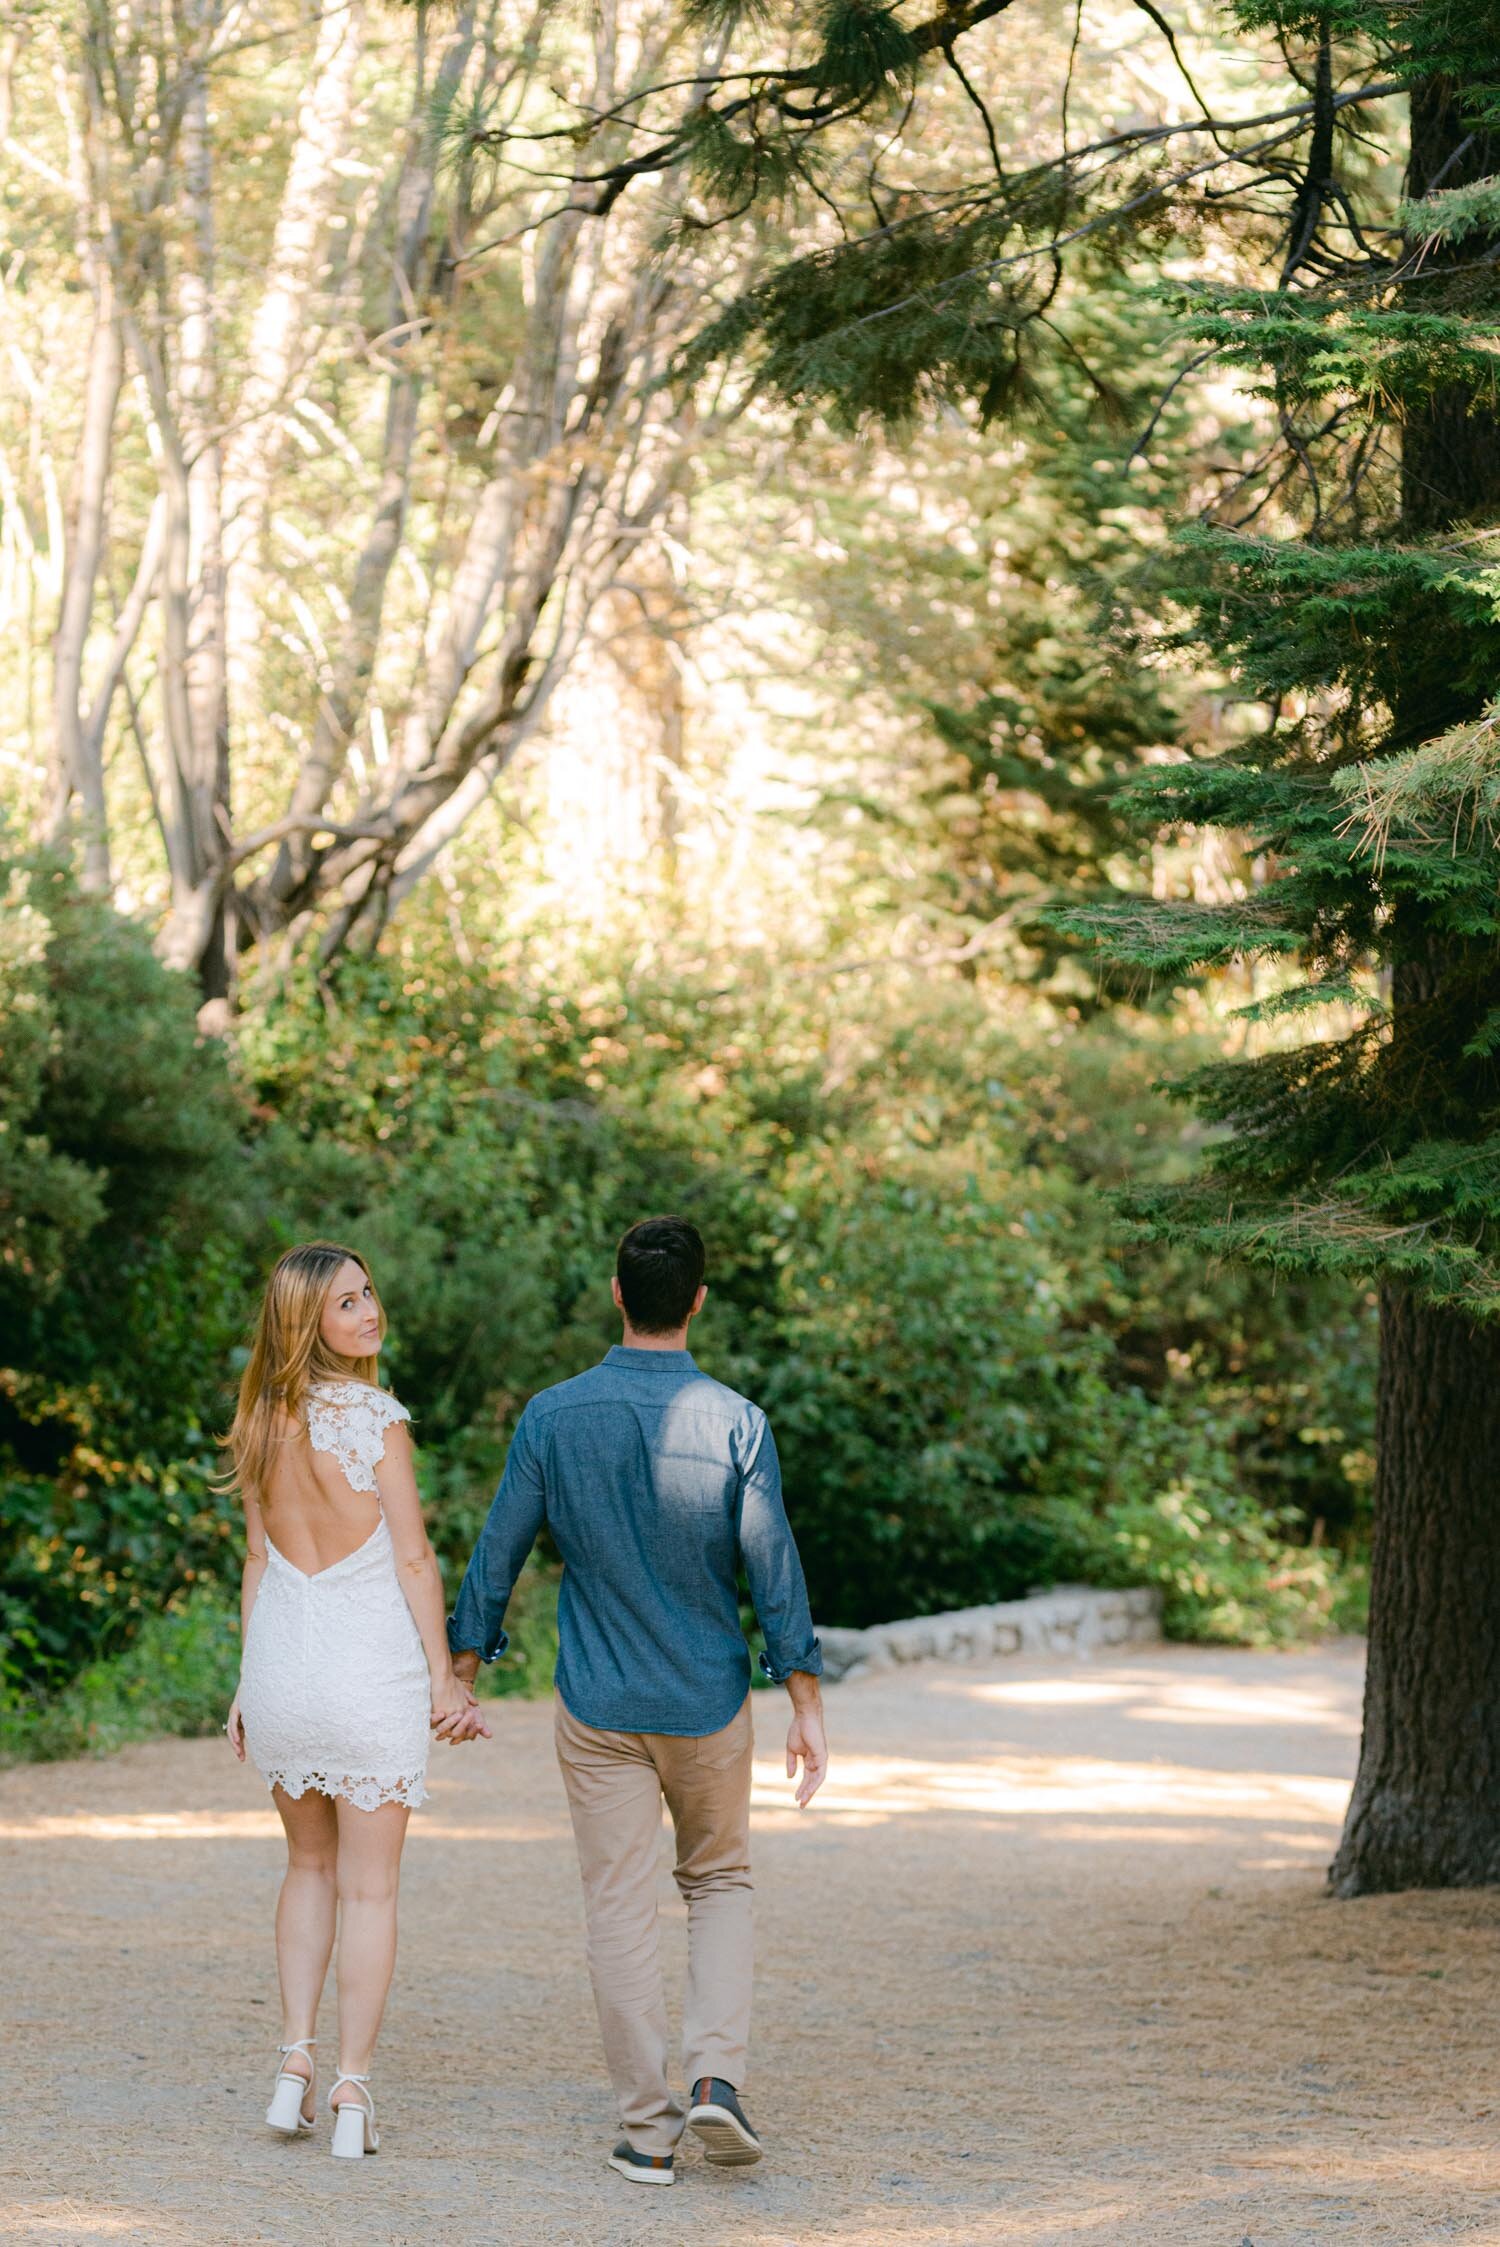 Emerald Bay engagement photoshoot, photo of a couple walking away and the girl looking over her shoulder